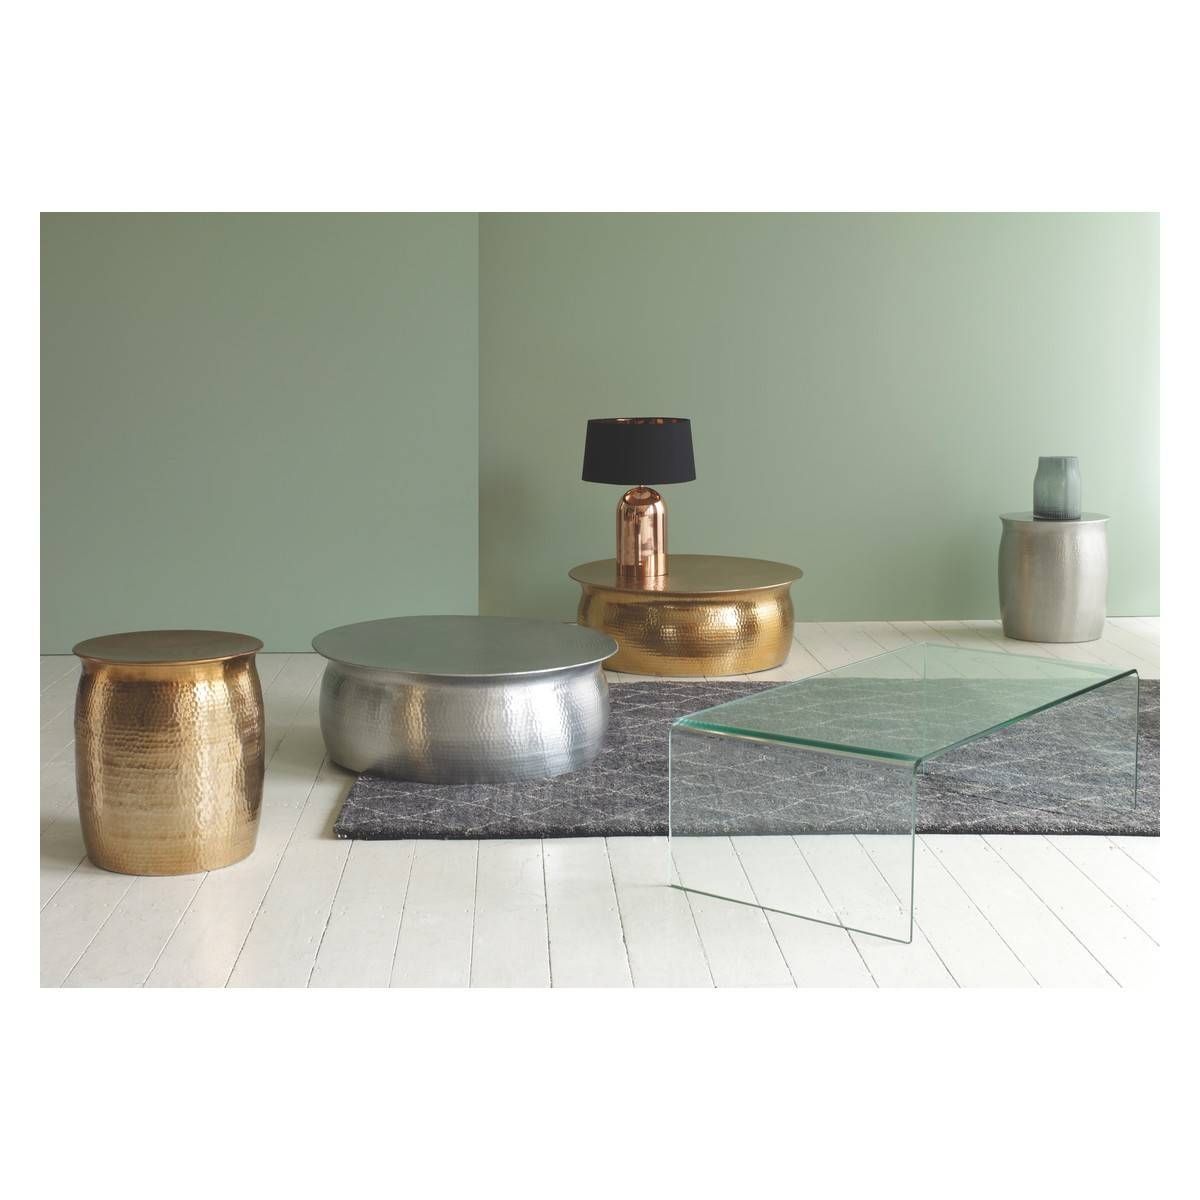 Orrico Hammered Aluminium Coffee Table | Buy Now At Habitat Uk With Regard To Aluminium Coffee Tables (View 4 of 30)